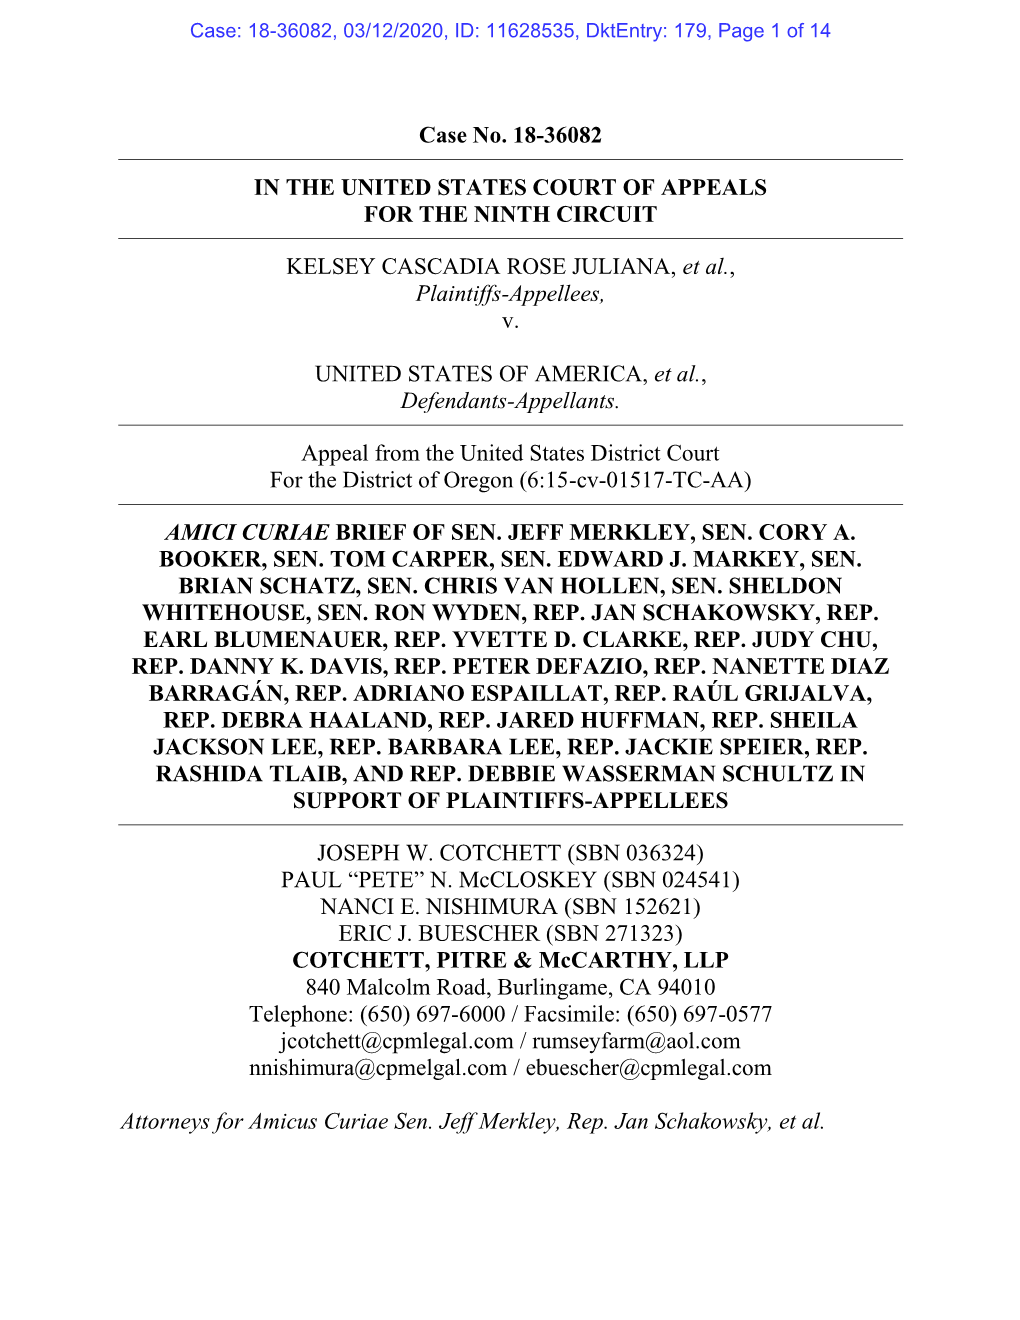 Case No. 18-36082 in the UNITED STATES COURT of APPEALS for the NINTH CIRCUIT KELSEY CASCADIA ROSE JULIANA, Et Al., Plaintiffs